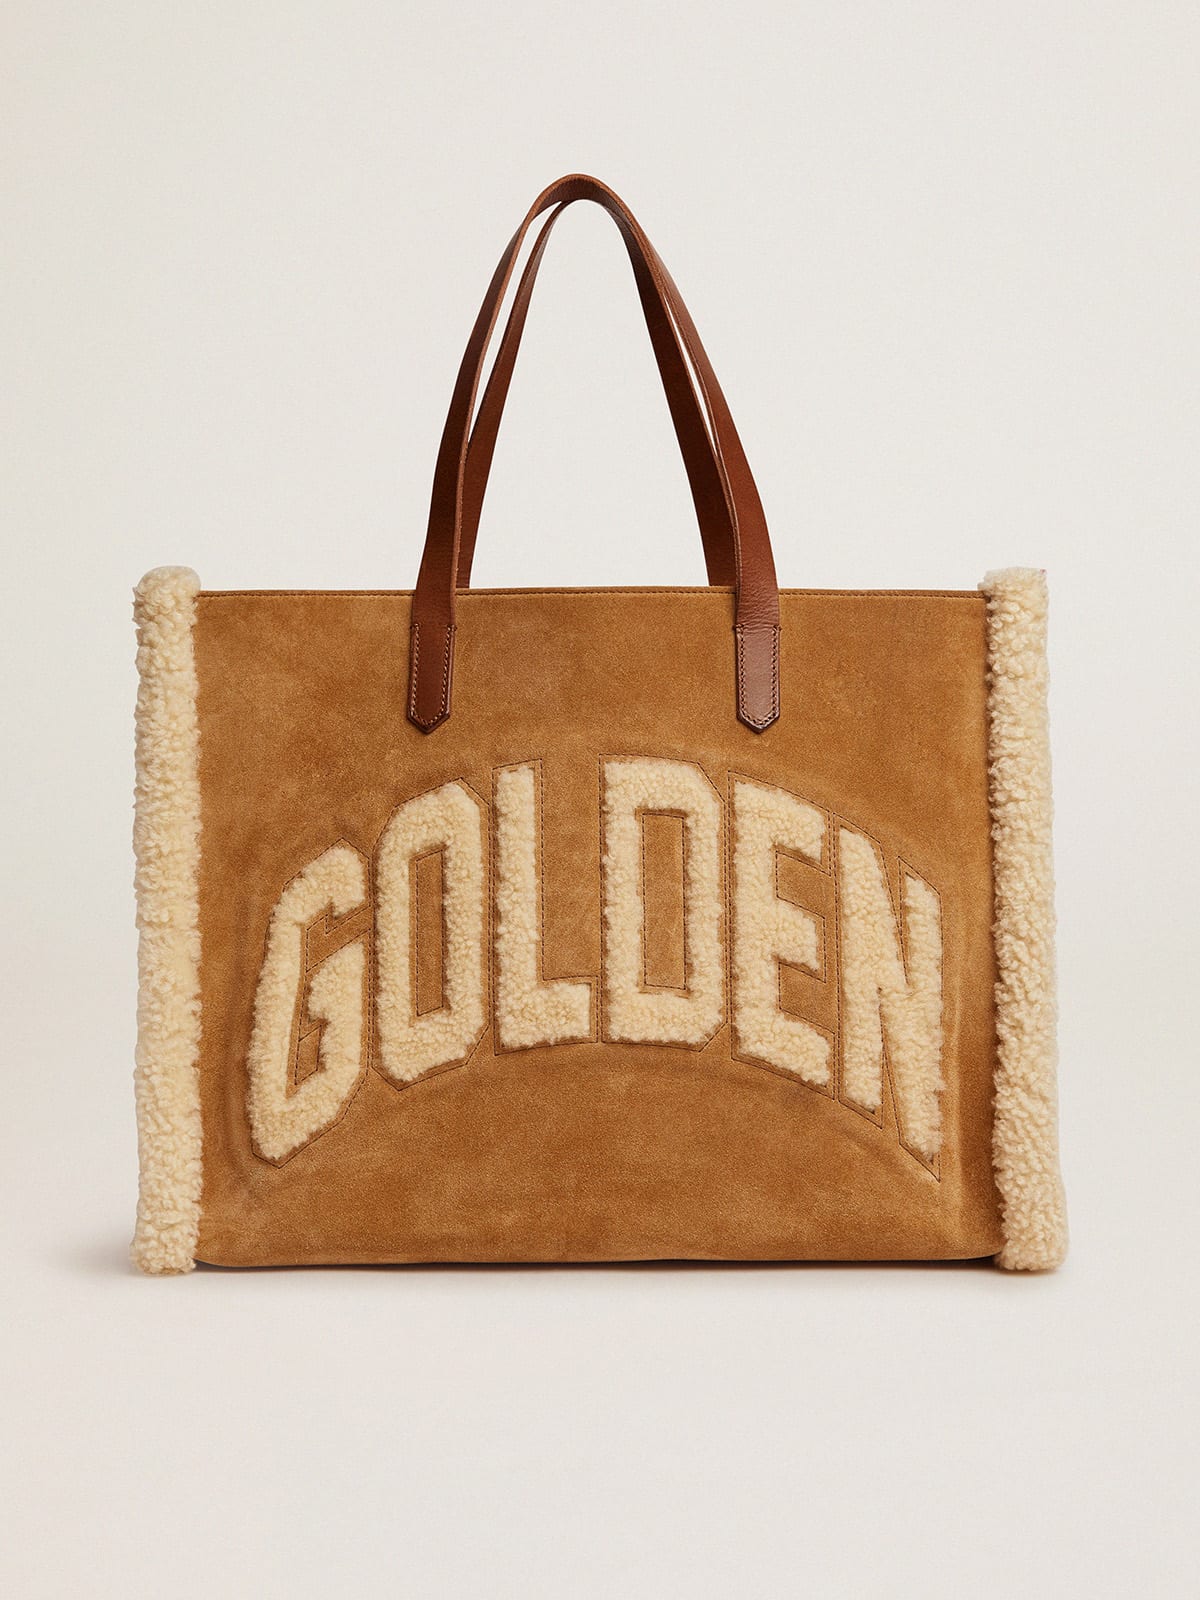 Golden Goose - East-West California Bag in suede leather with shearling in 